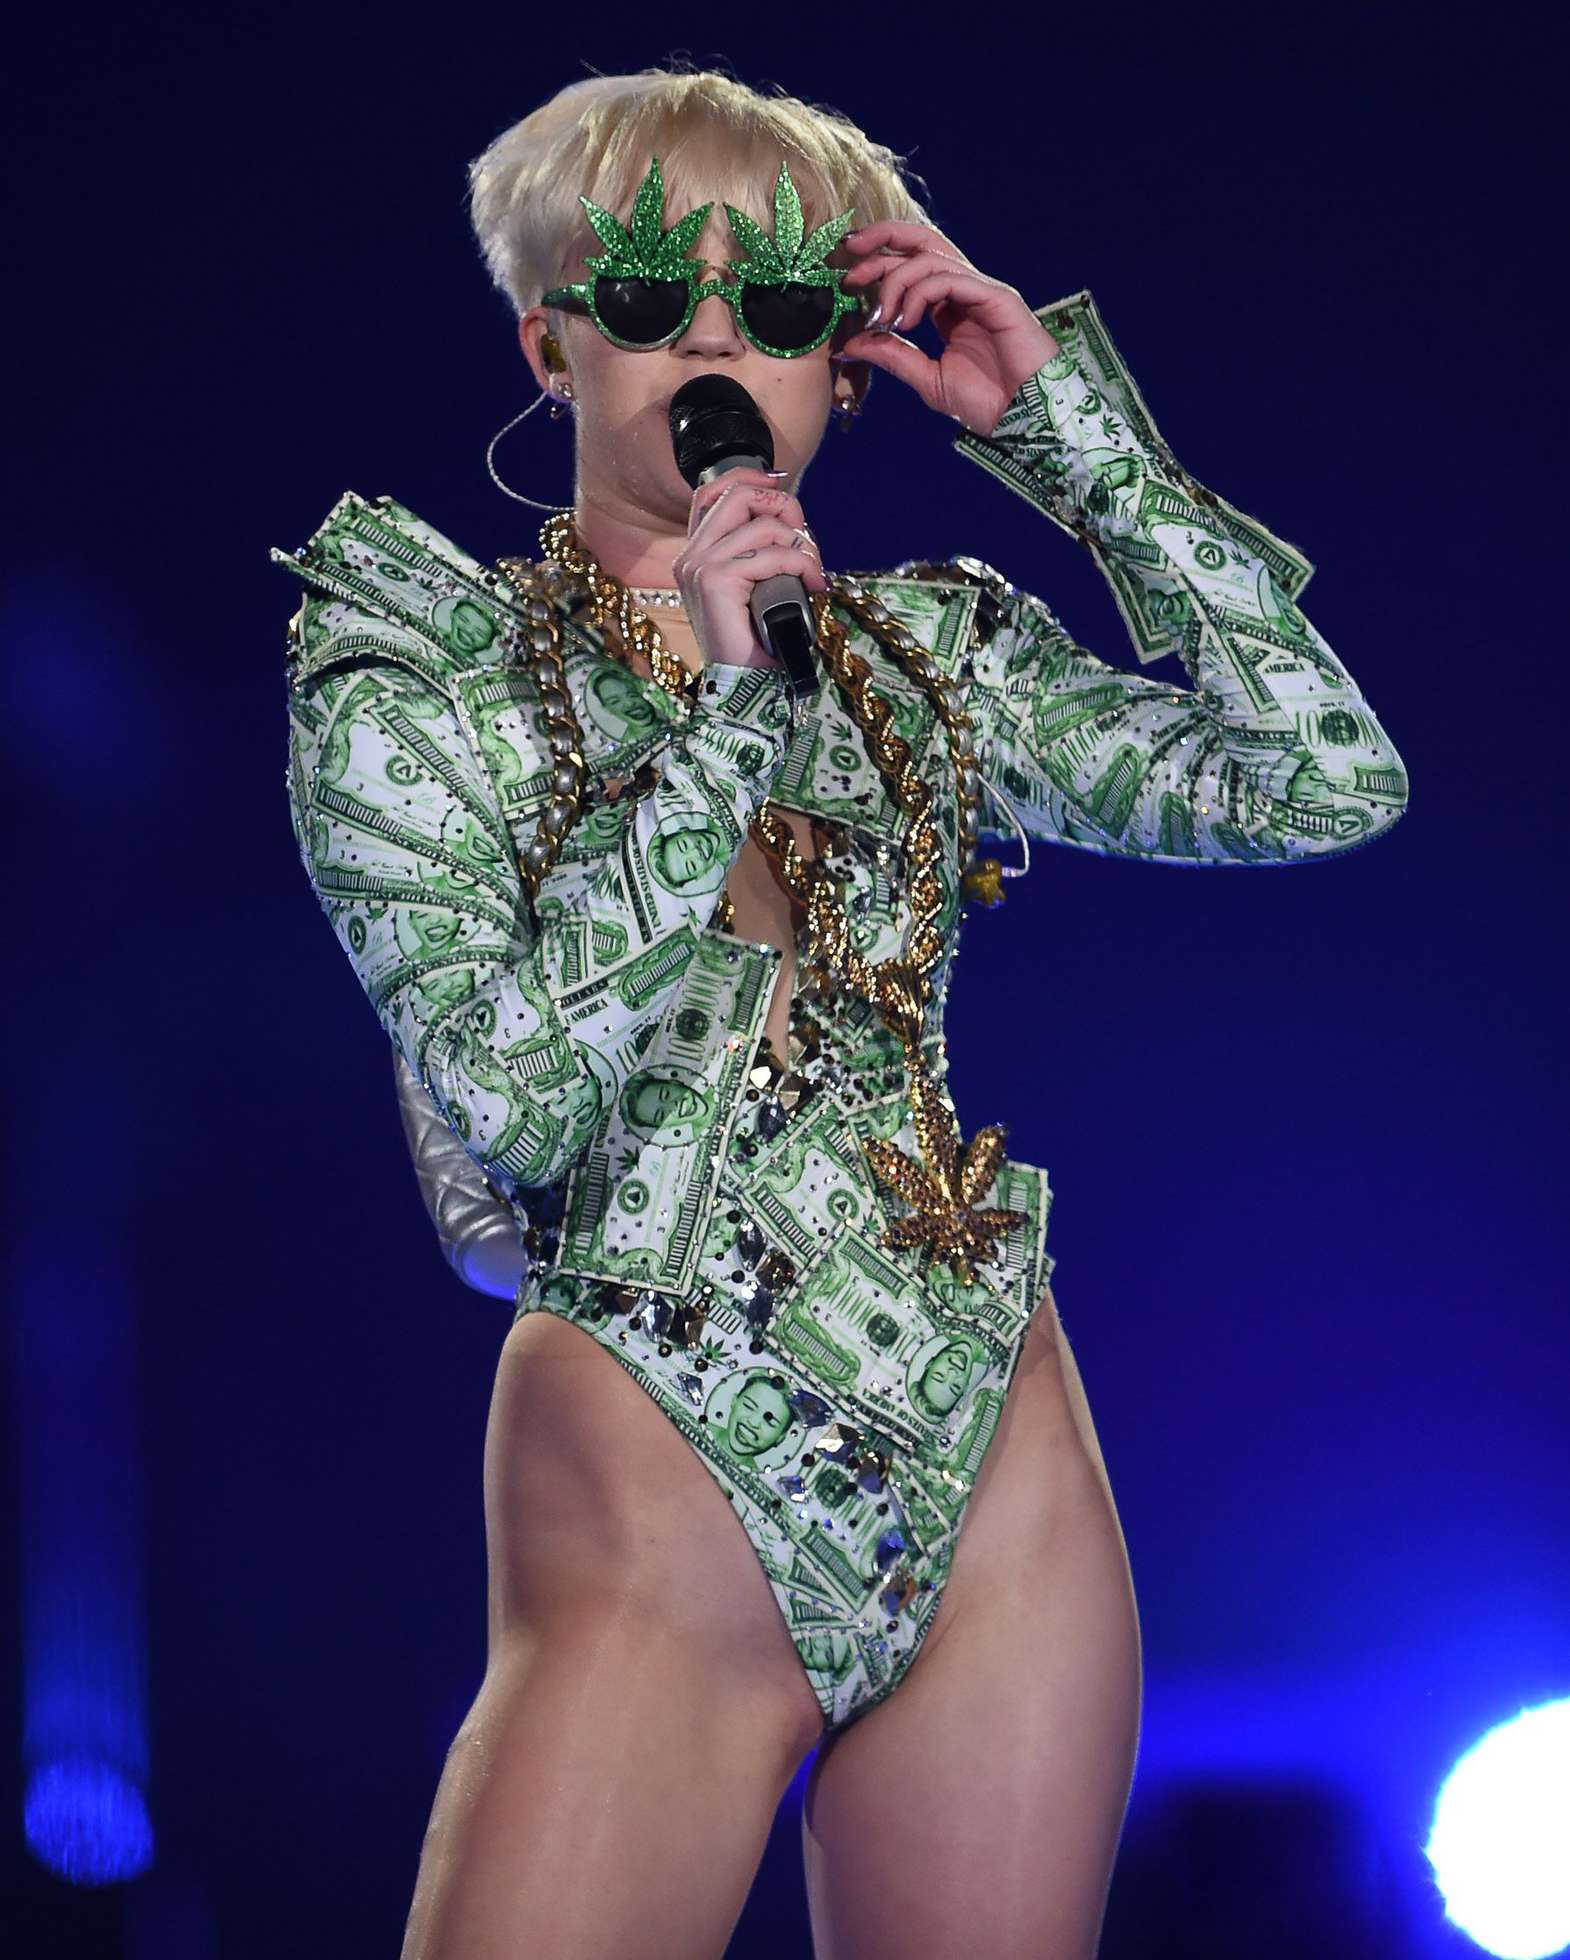 miley cyrus in tour